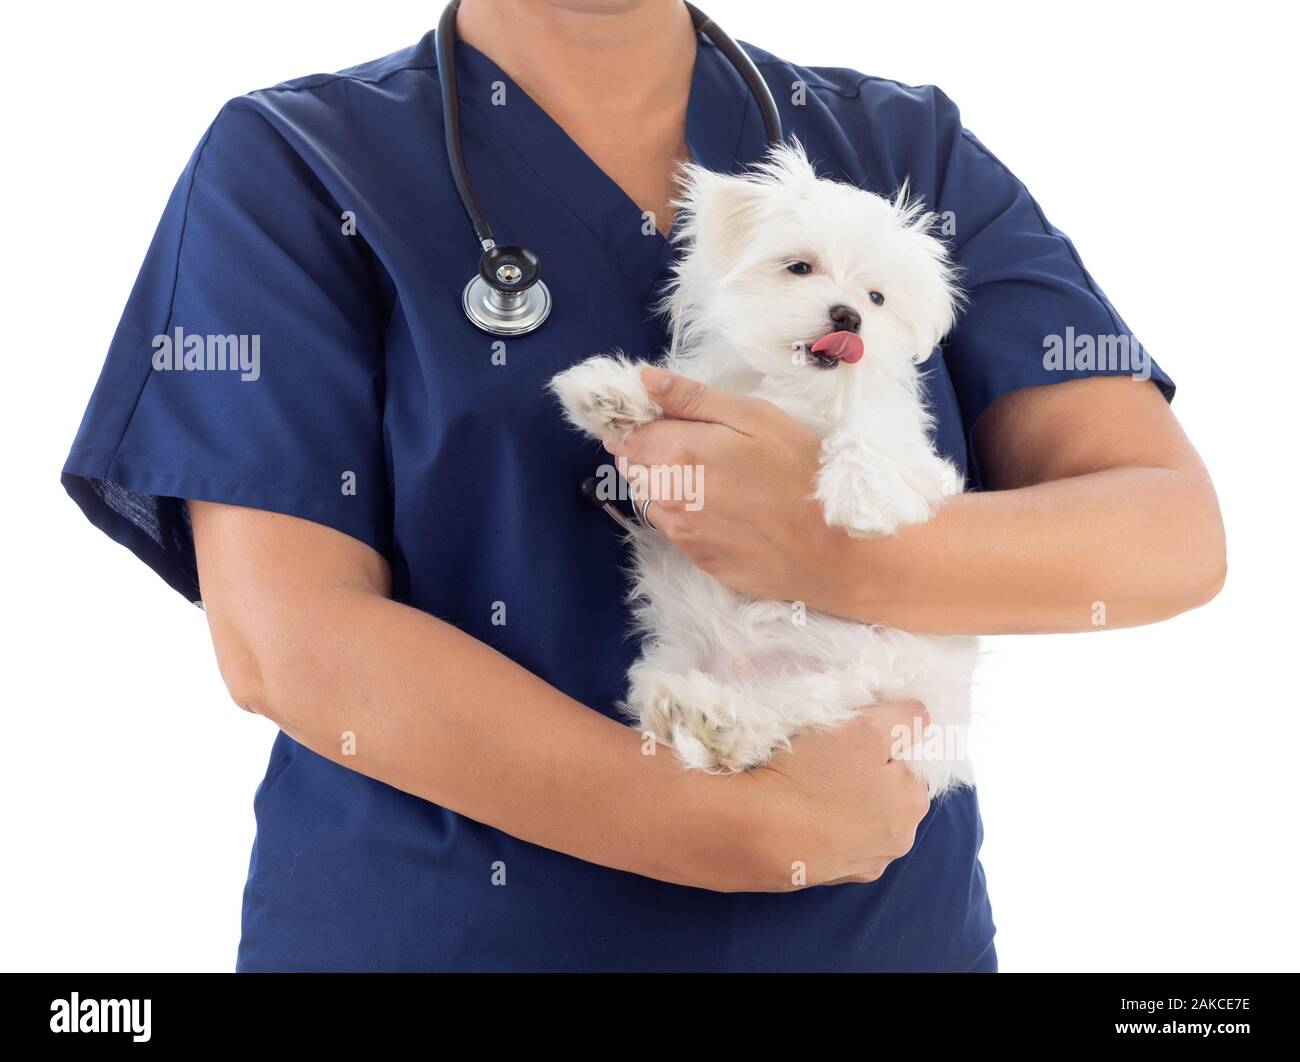 Female Veterinarian with Stethoscope Holding Young Maltese Puppy Isolated on White. Stock Photo